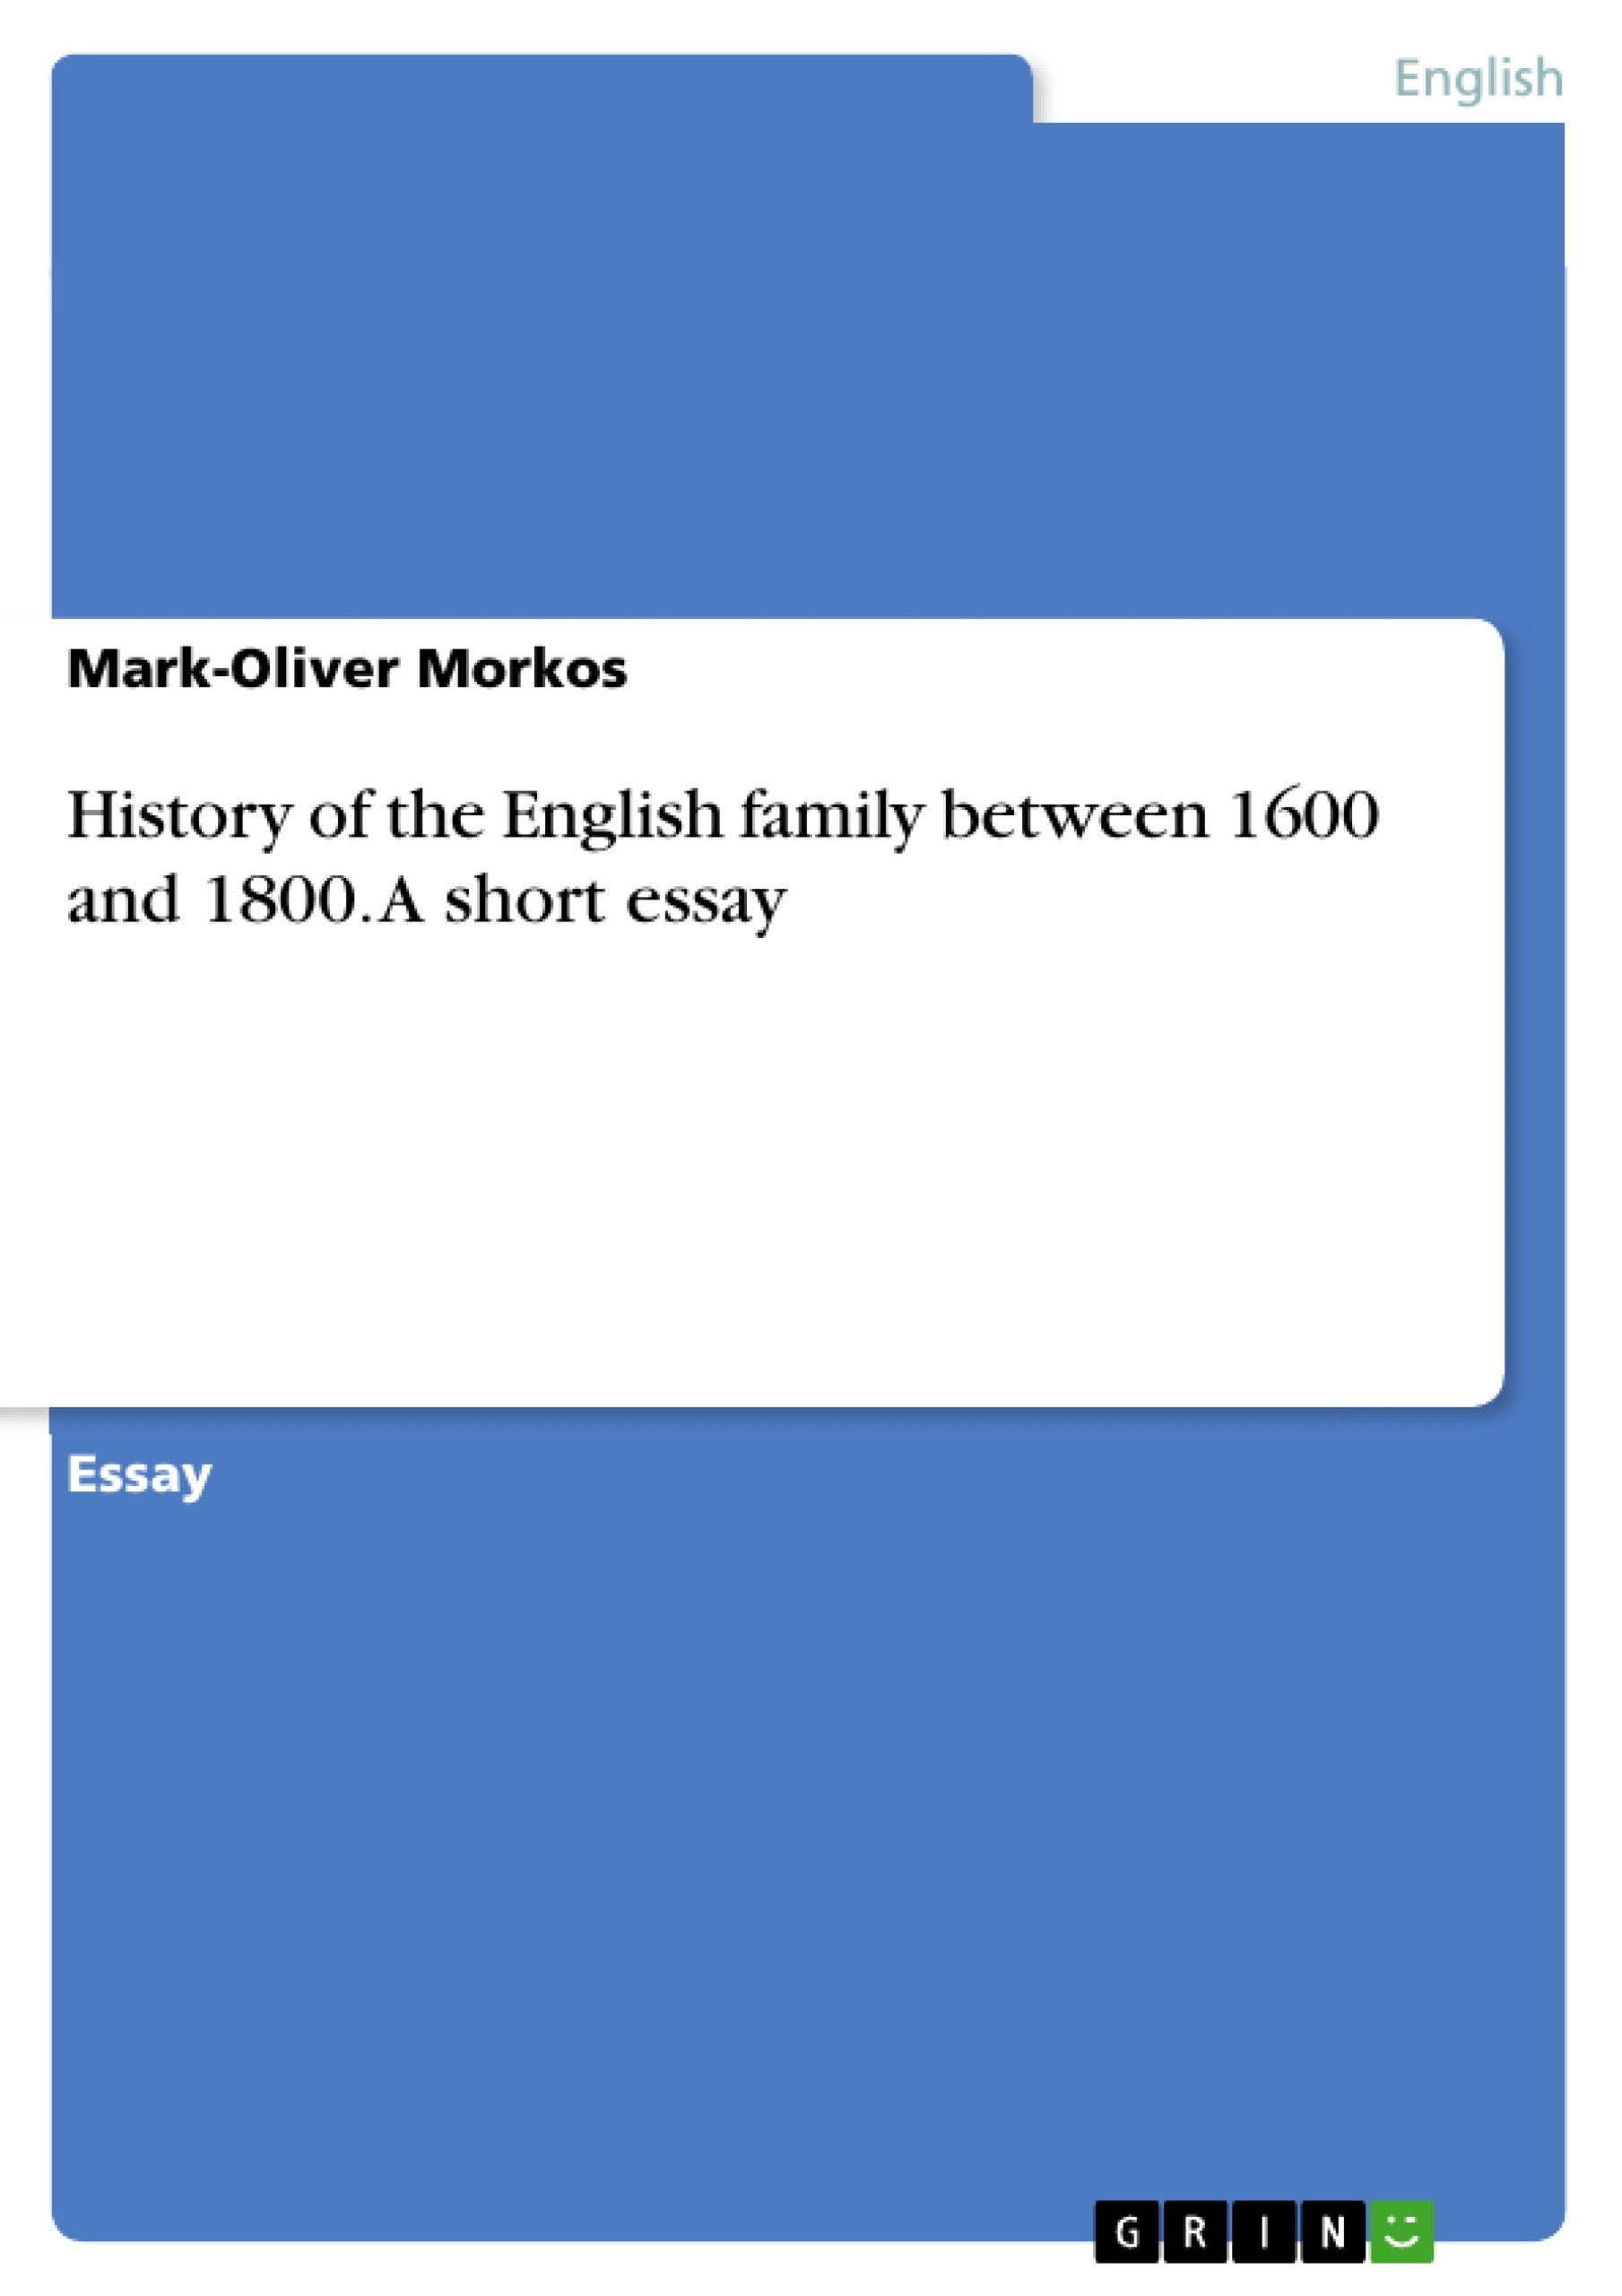 Titre: History of the English family between 1600 and 1800. A short essay